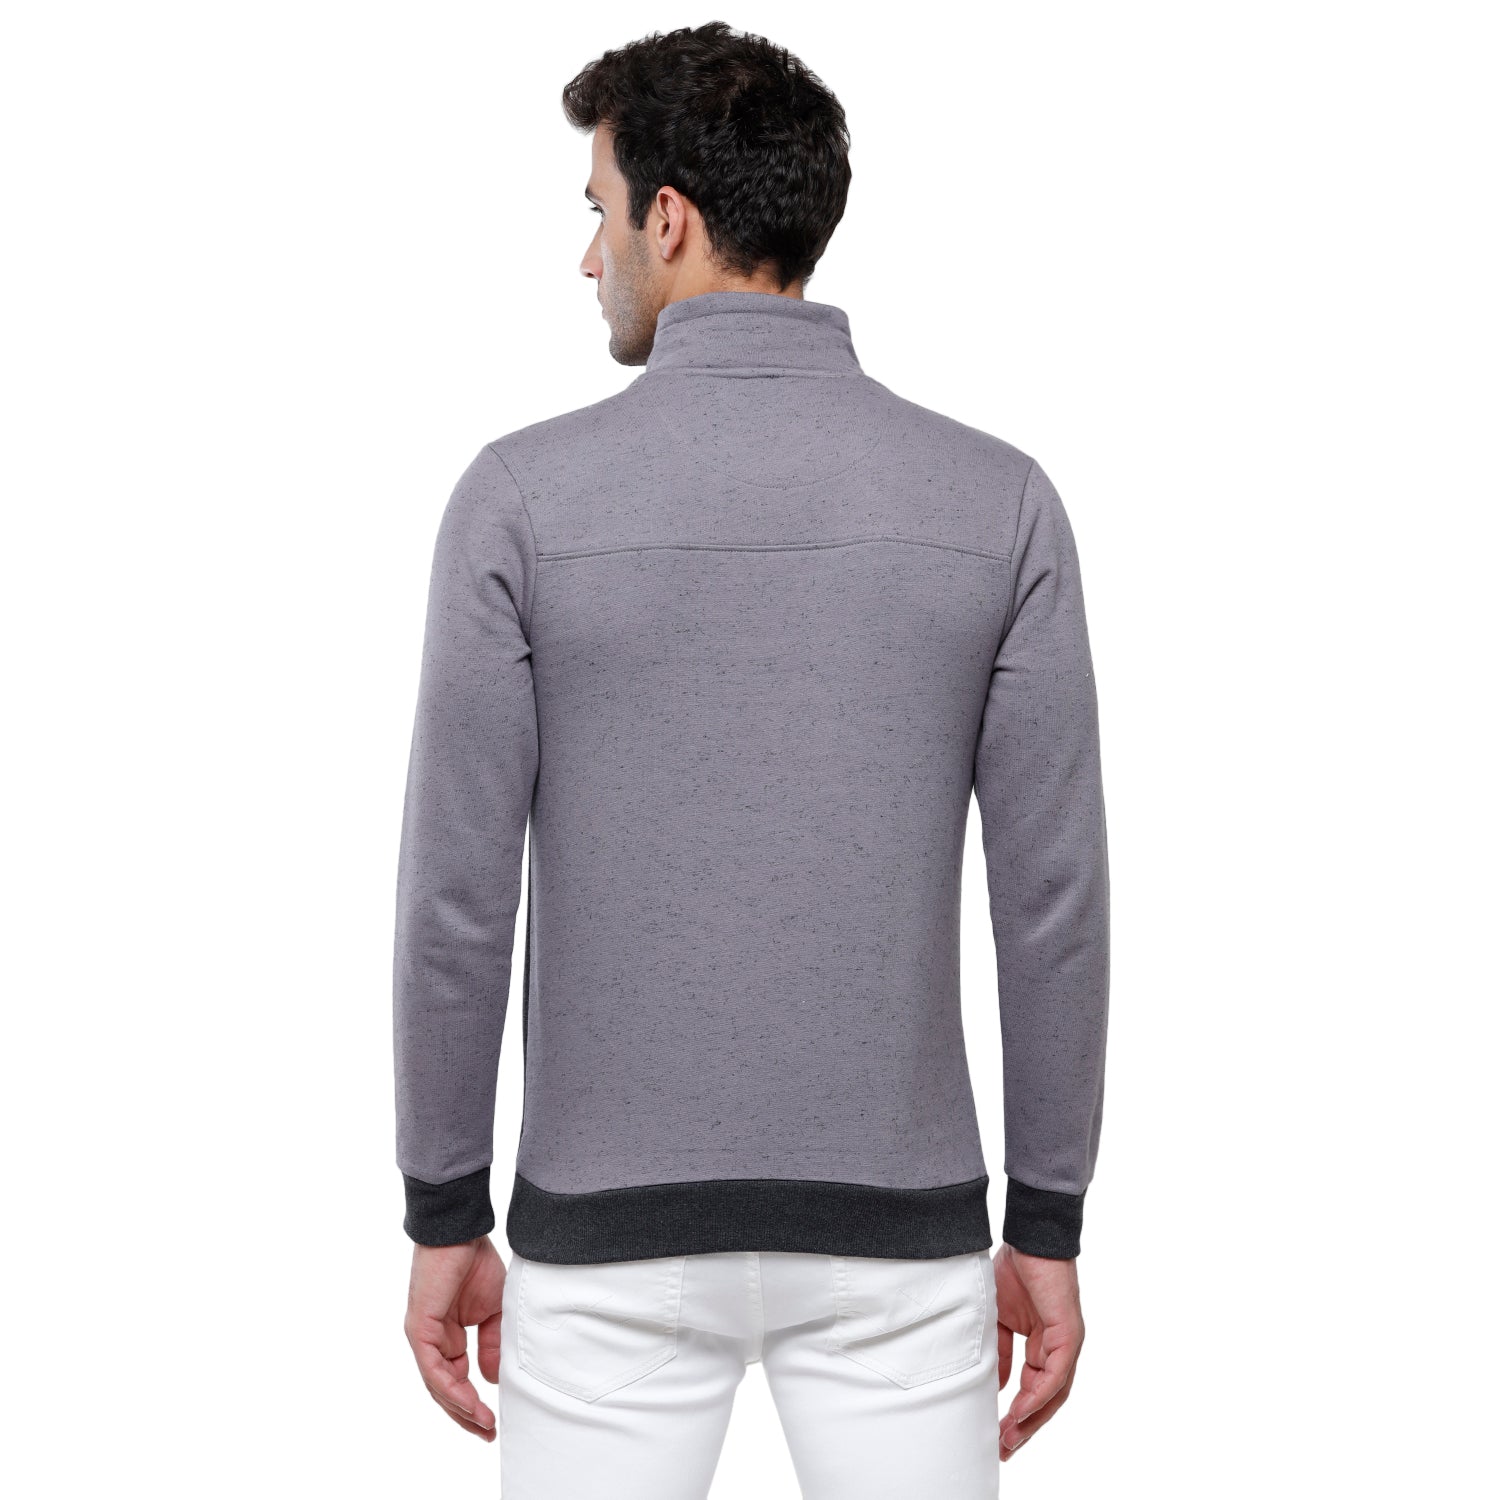 Classic Polo Men's Color Block Full Sleeve Grey H Neck Sweat Shirt - CPSS-324 B Sweat Shirts Classic Polo 